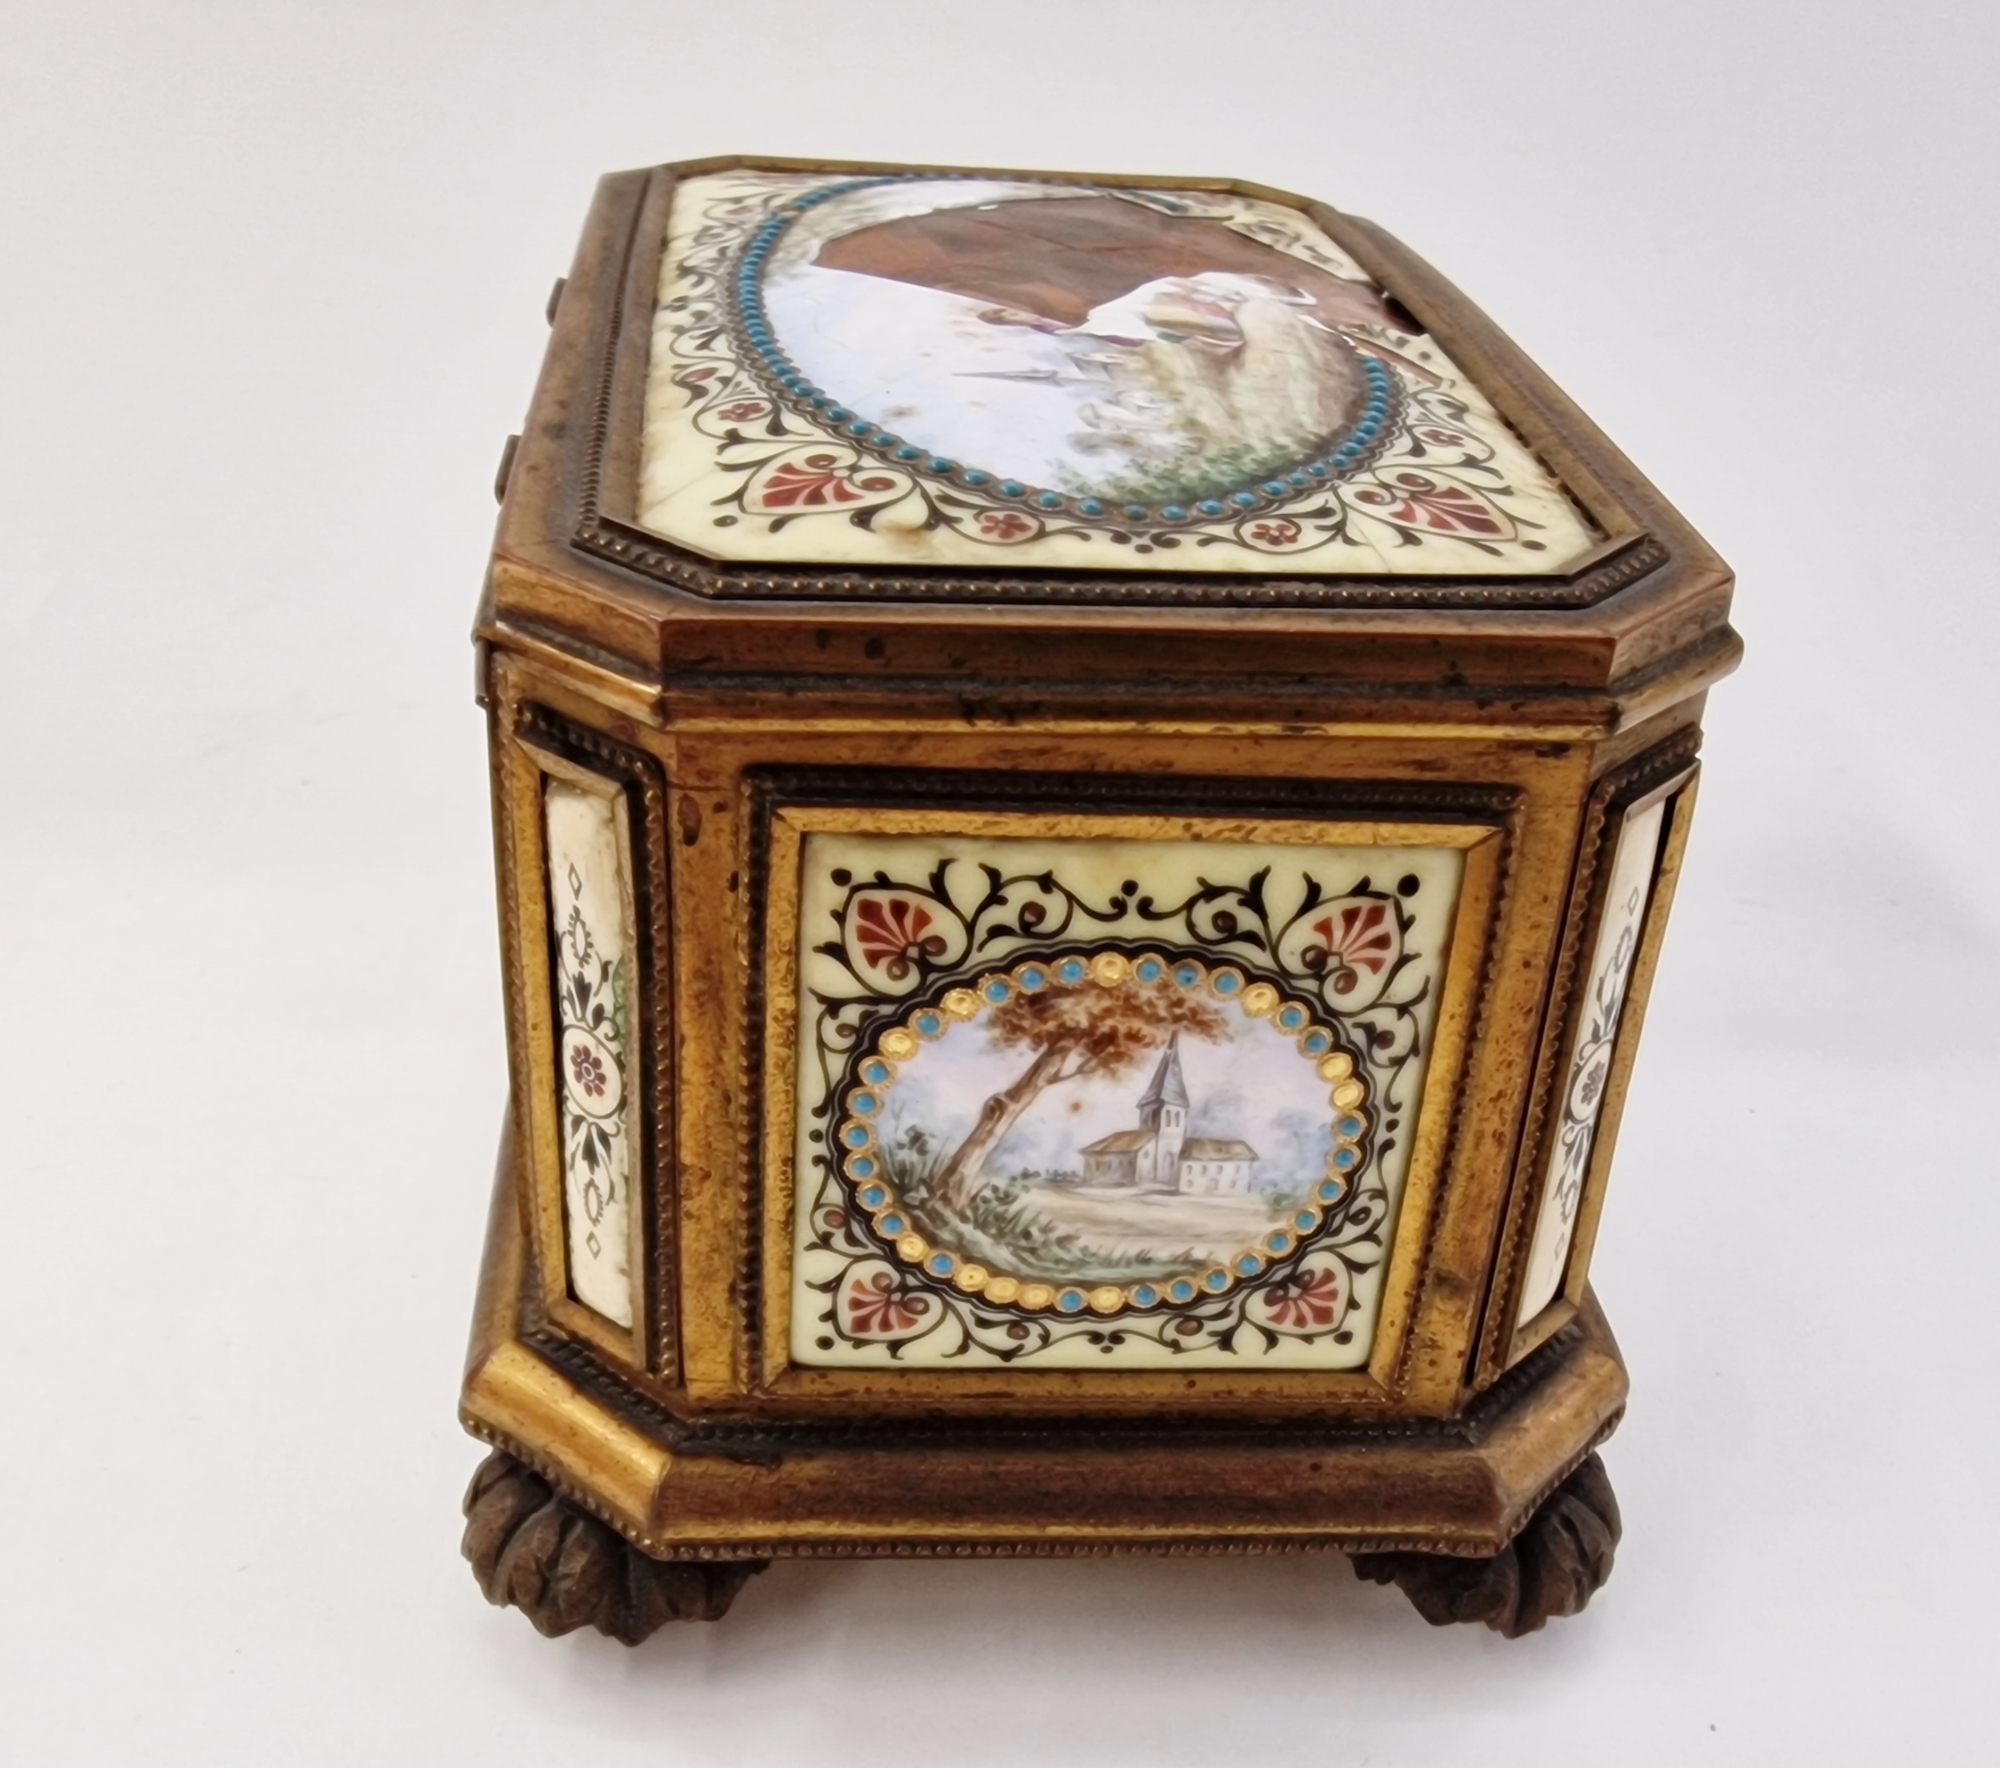 Late 19th century French enamel and gilt metal-mounted jewellery casket, of canted rectangular - Image 6 of 8